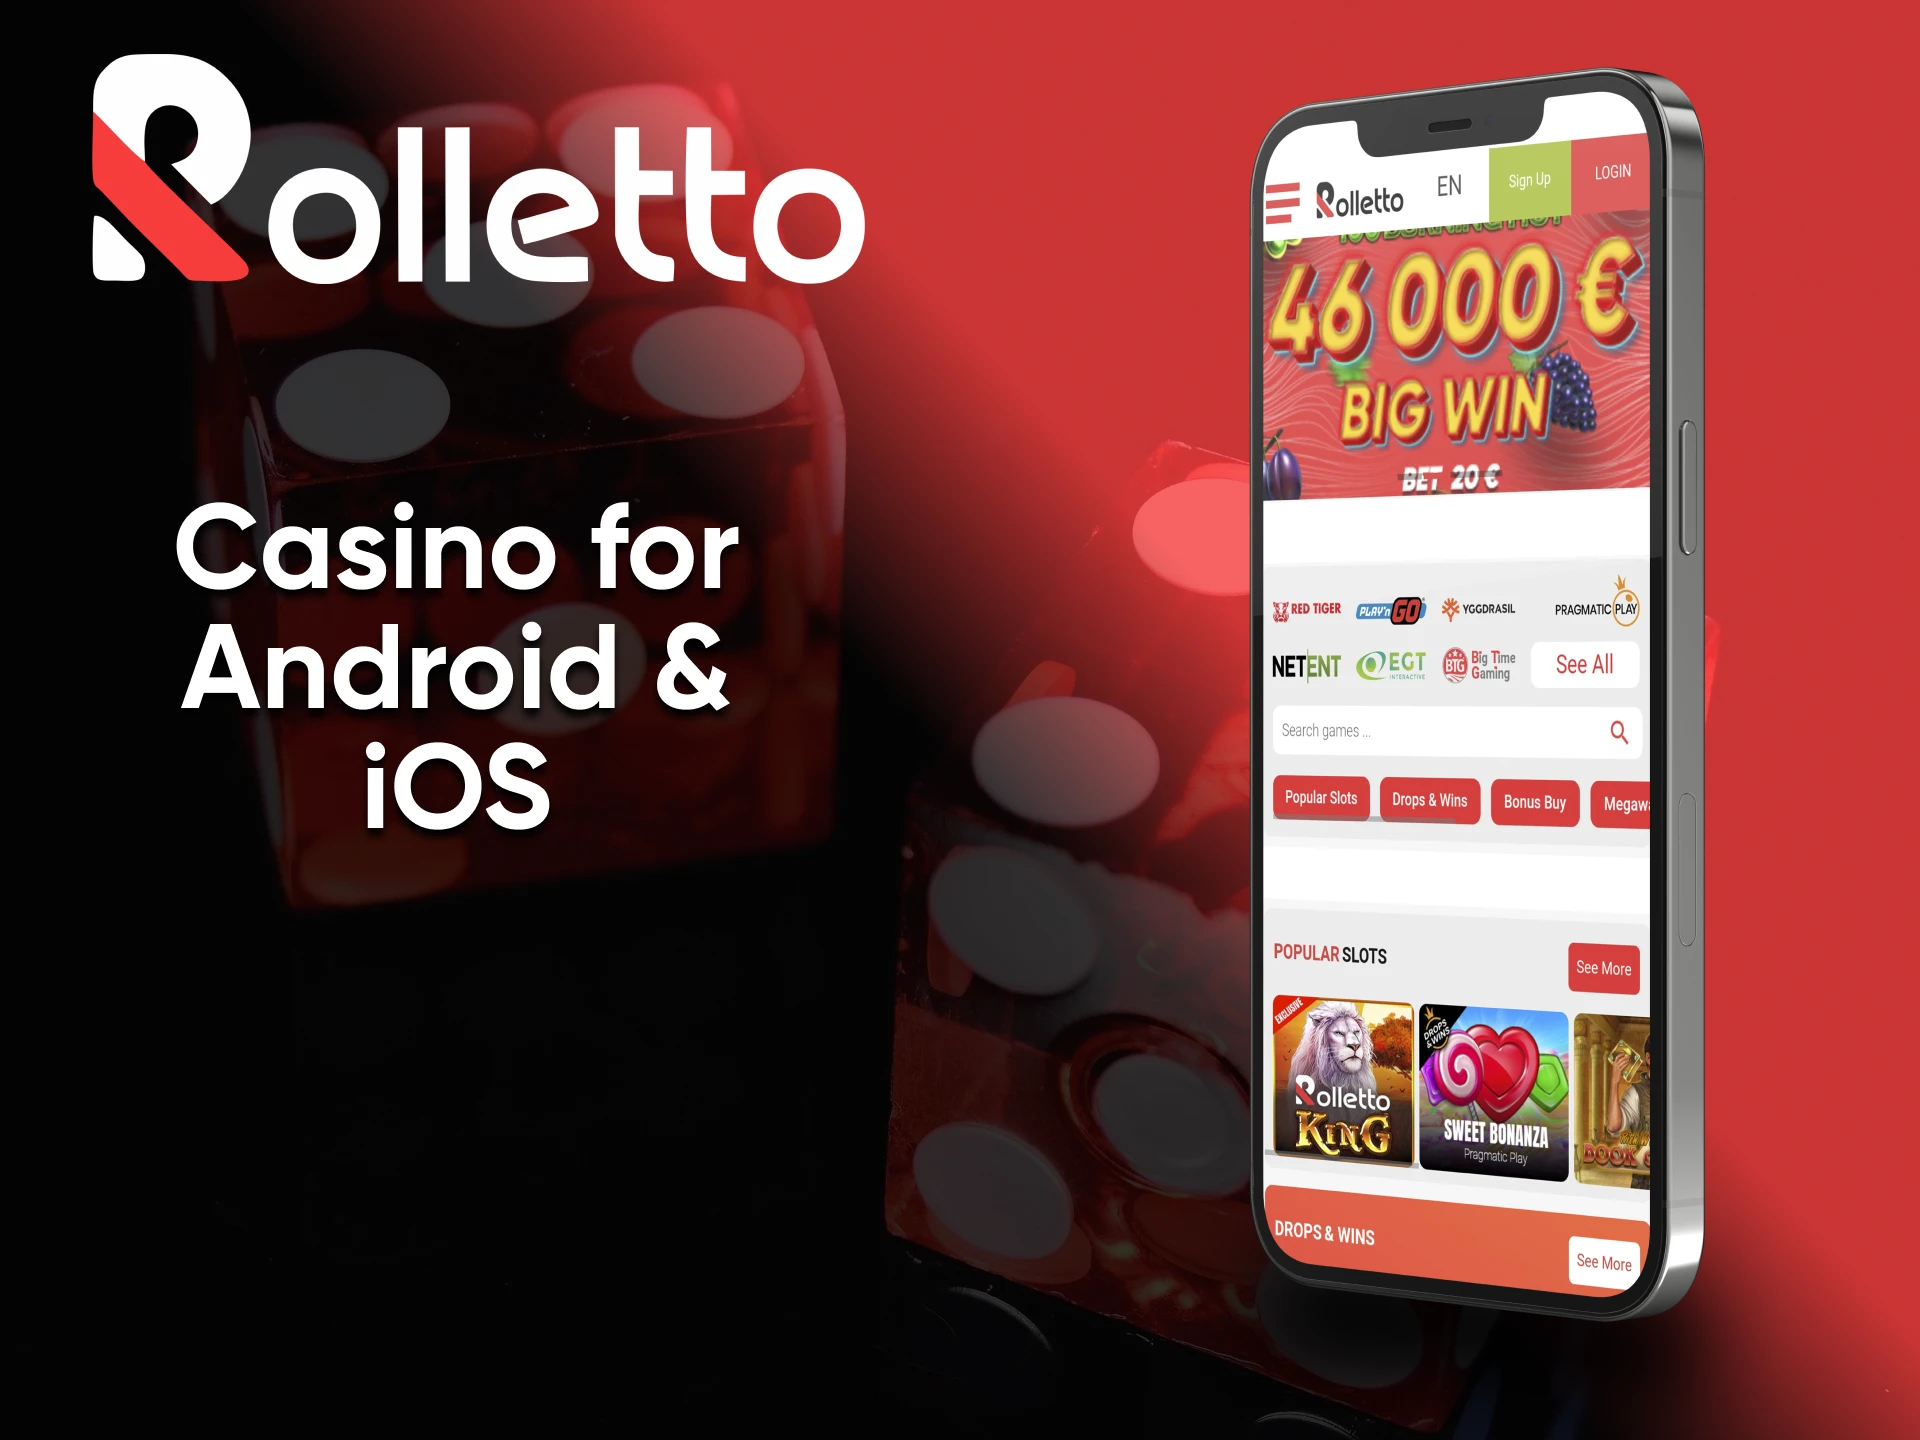 For Rolletto casino games you can use the mobile version of the site.